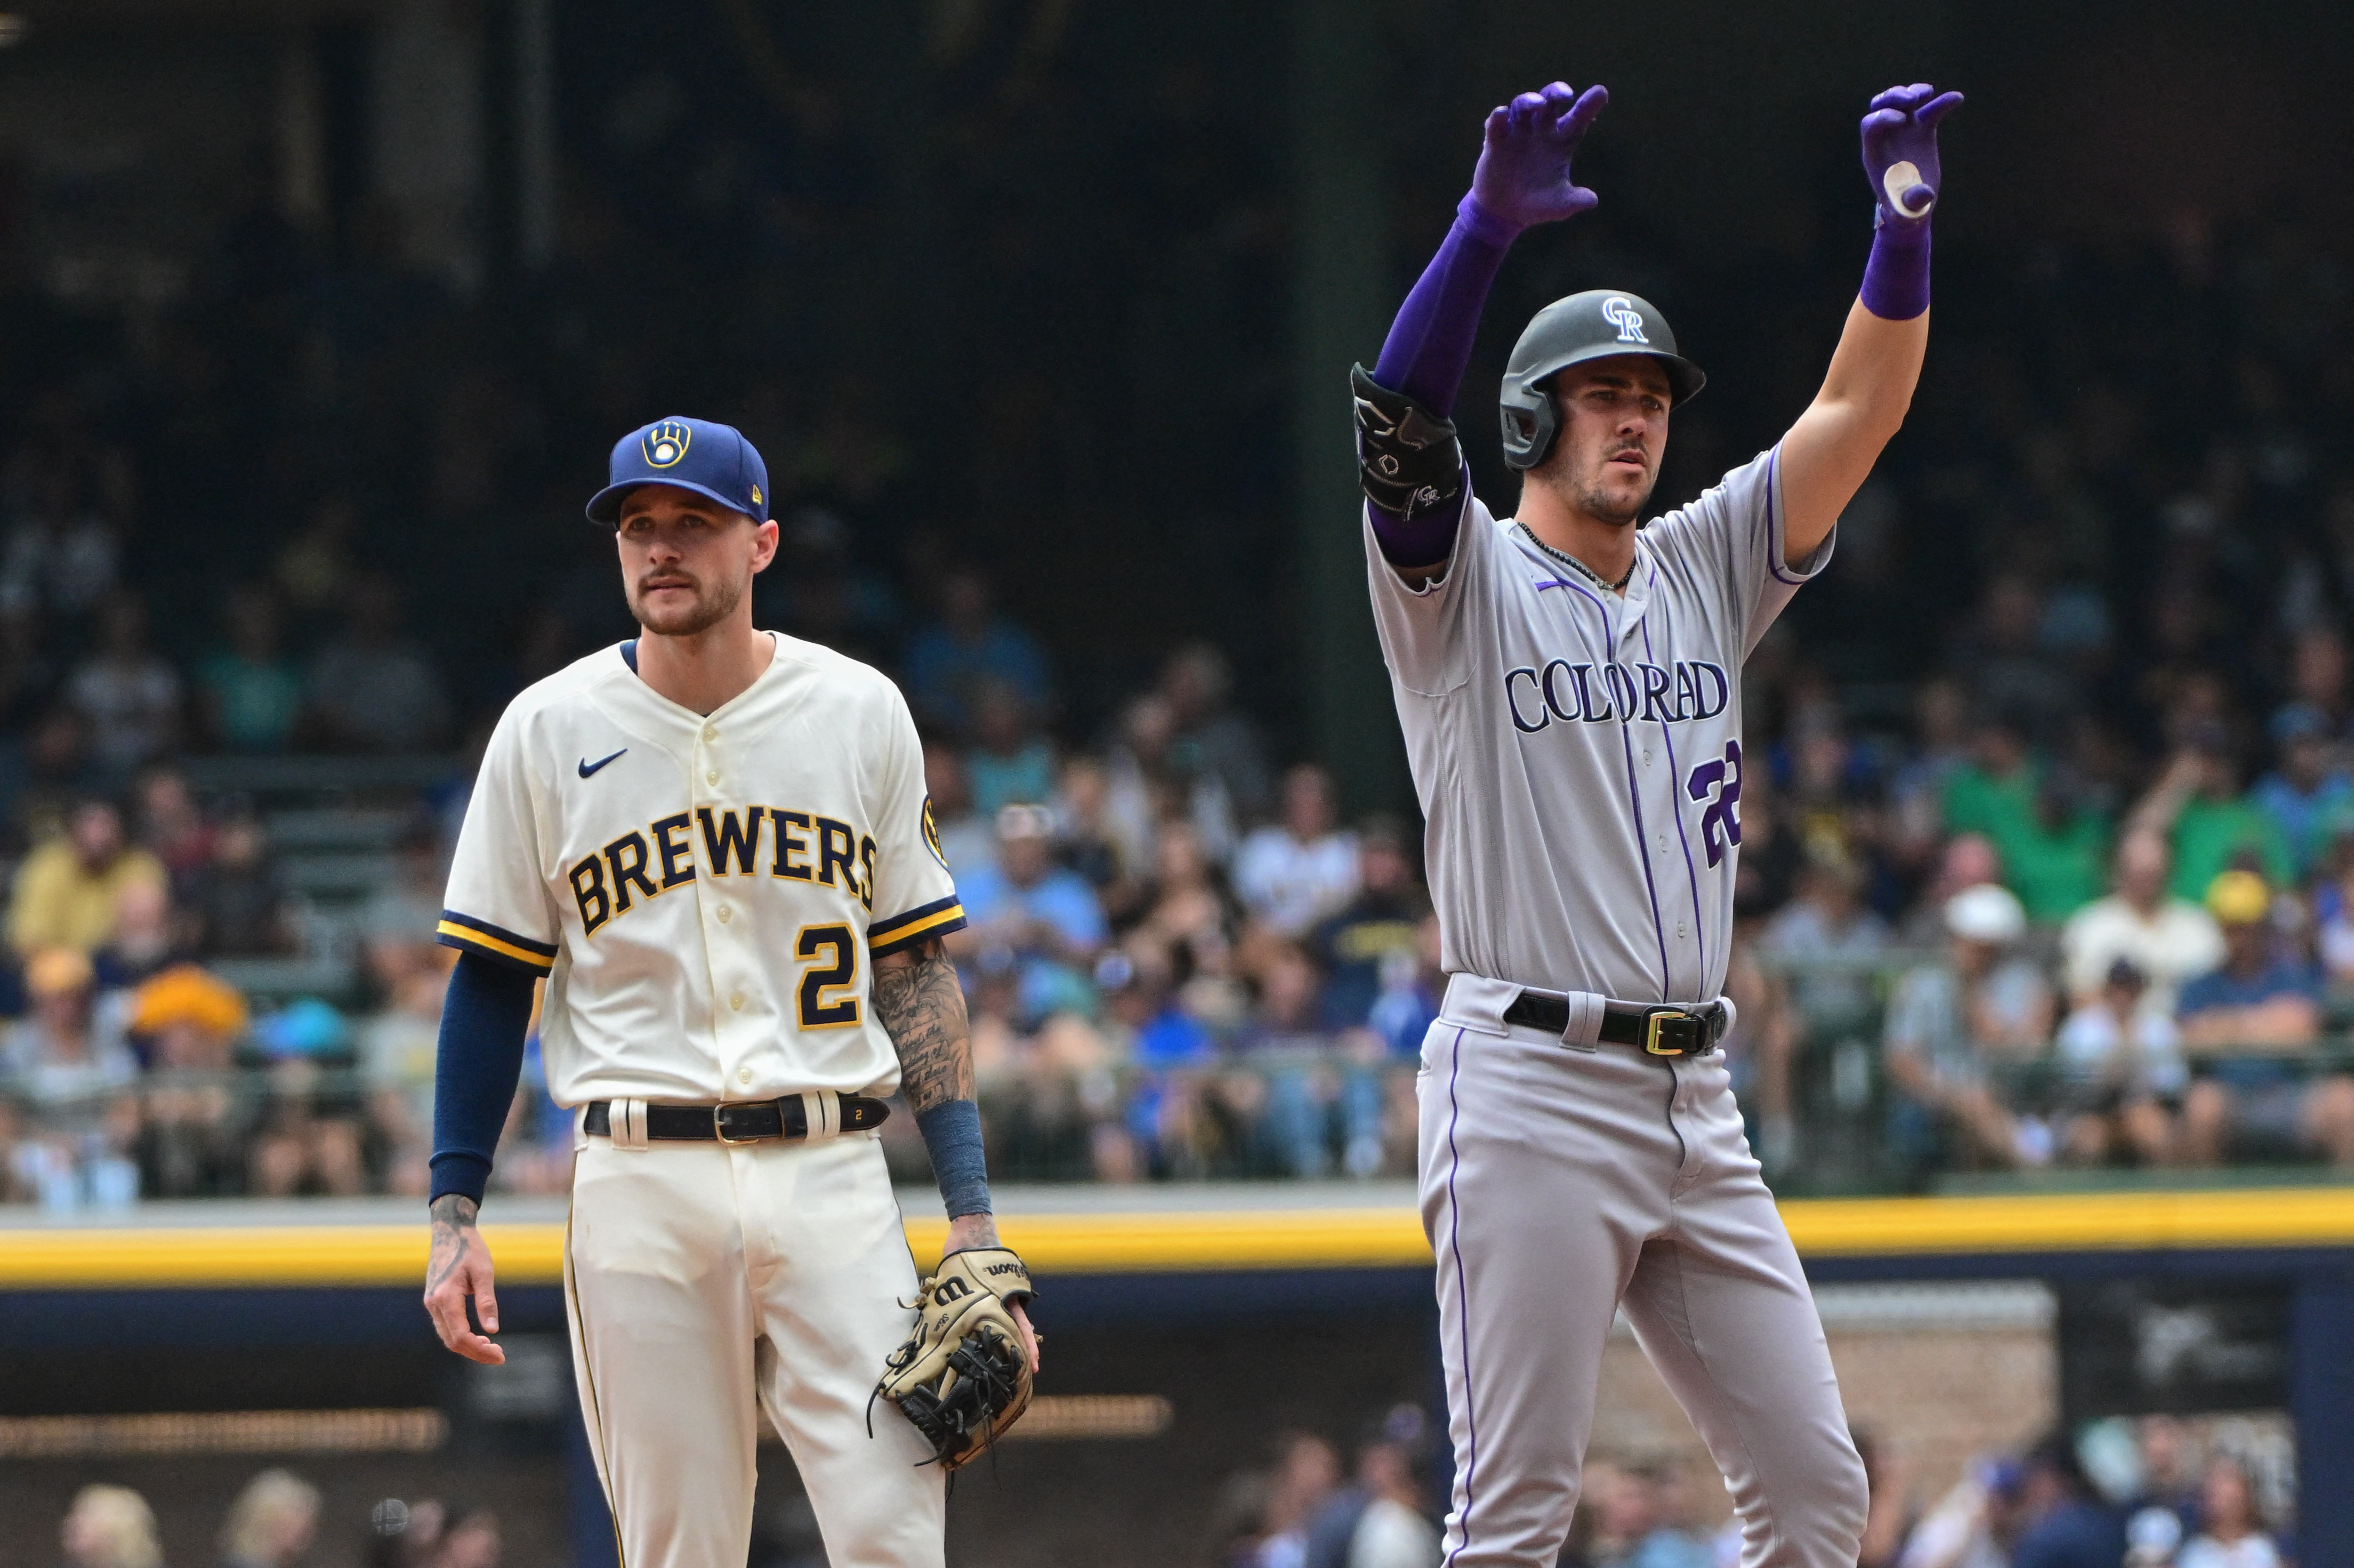 Rockies' road woes continue with walk-off hit batter sinking them